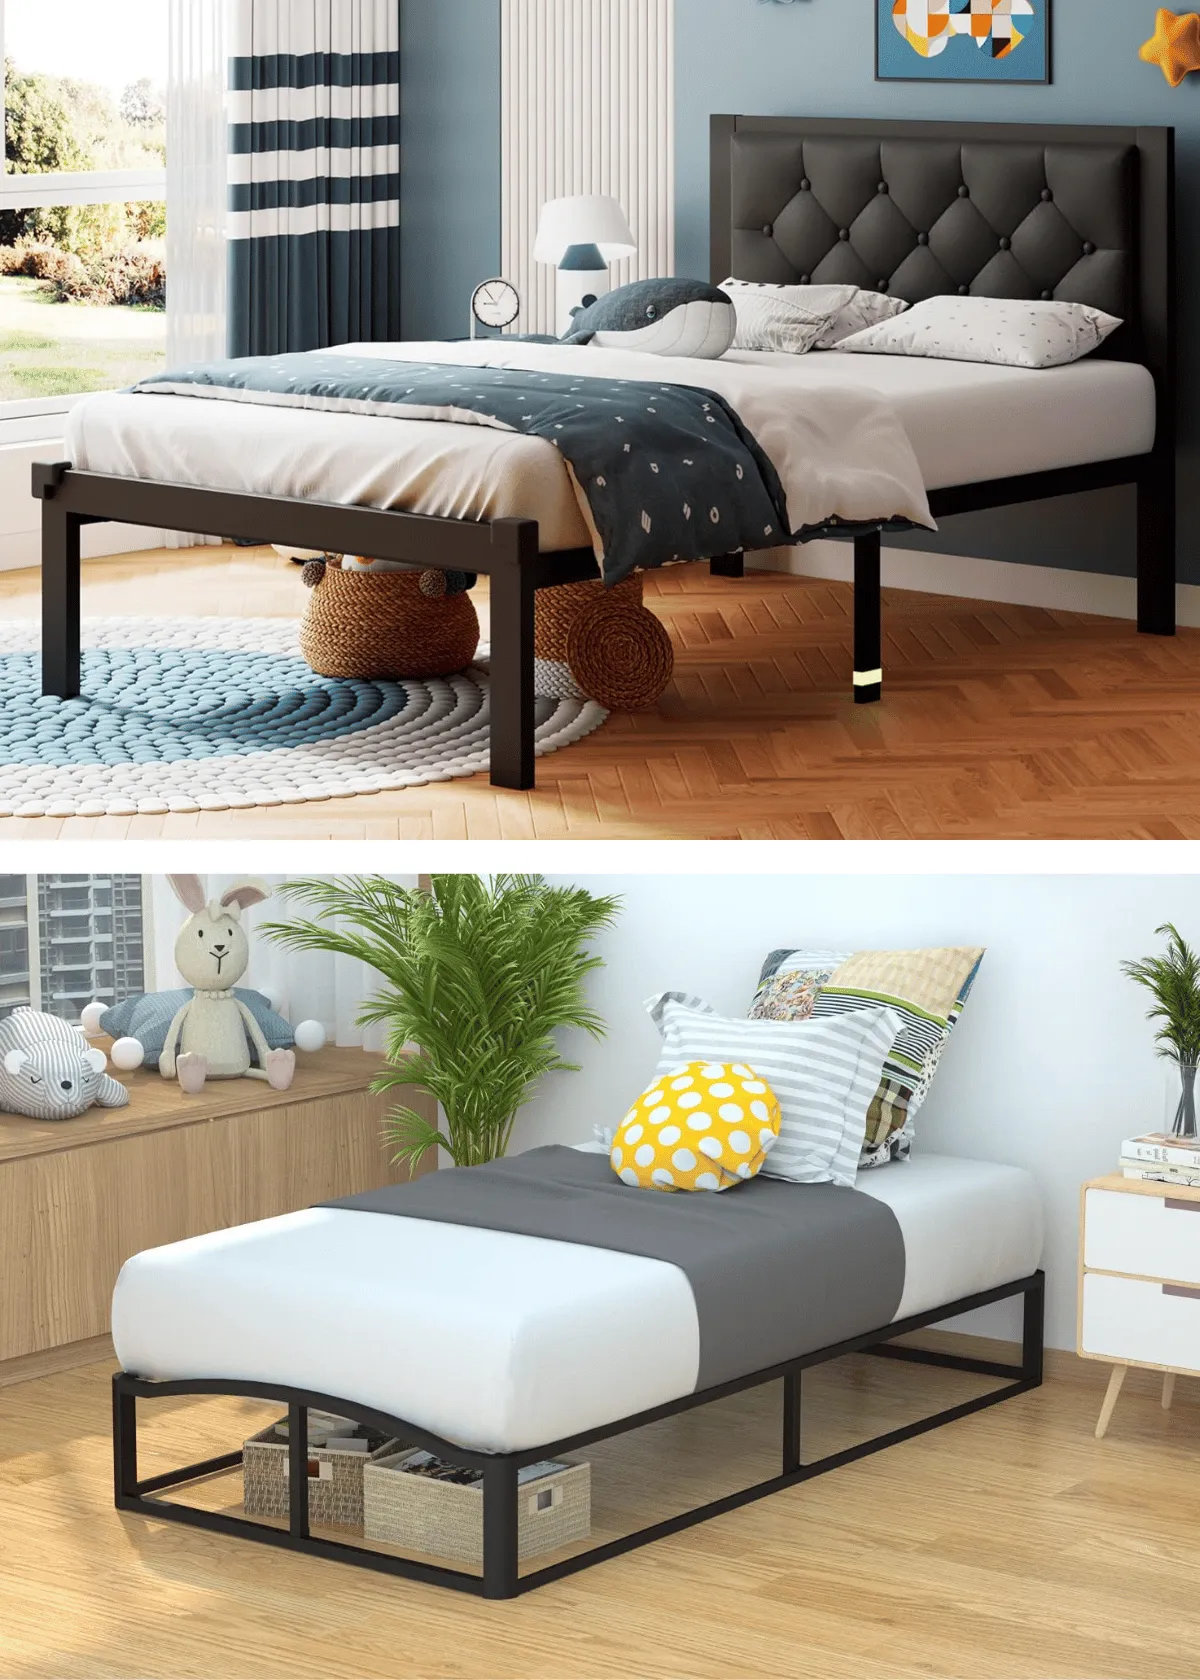 "10 Cheap Twin Bed Frames for a Stylish Kids & Teens Bedroom"